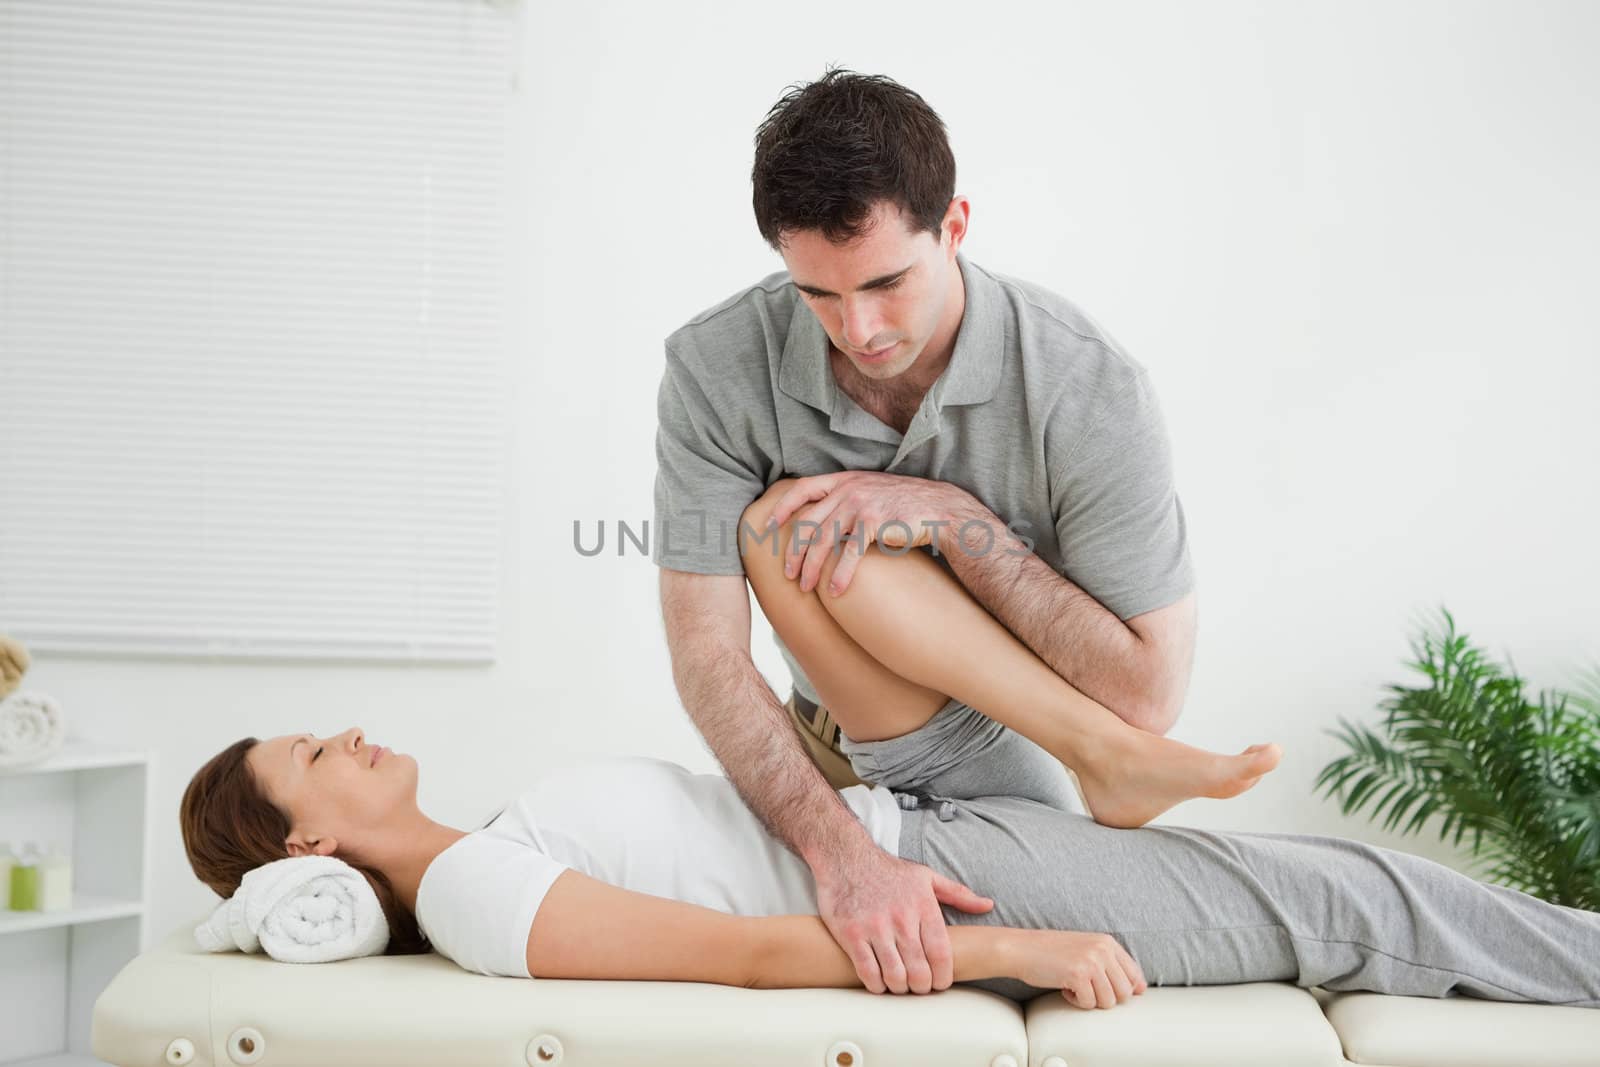 Brown-haired woman being stretched by a man in a room